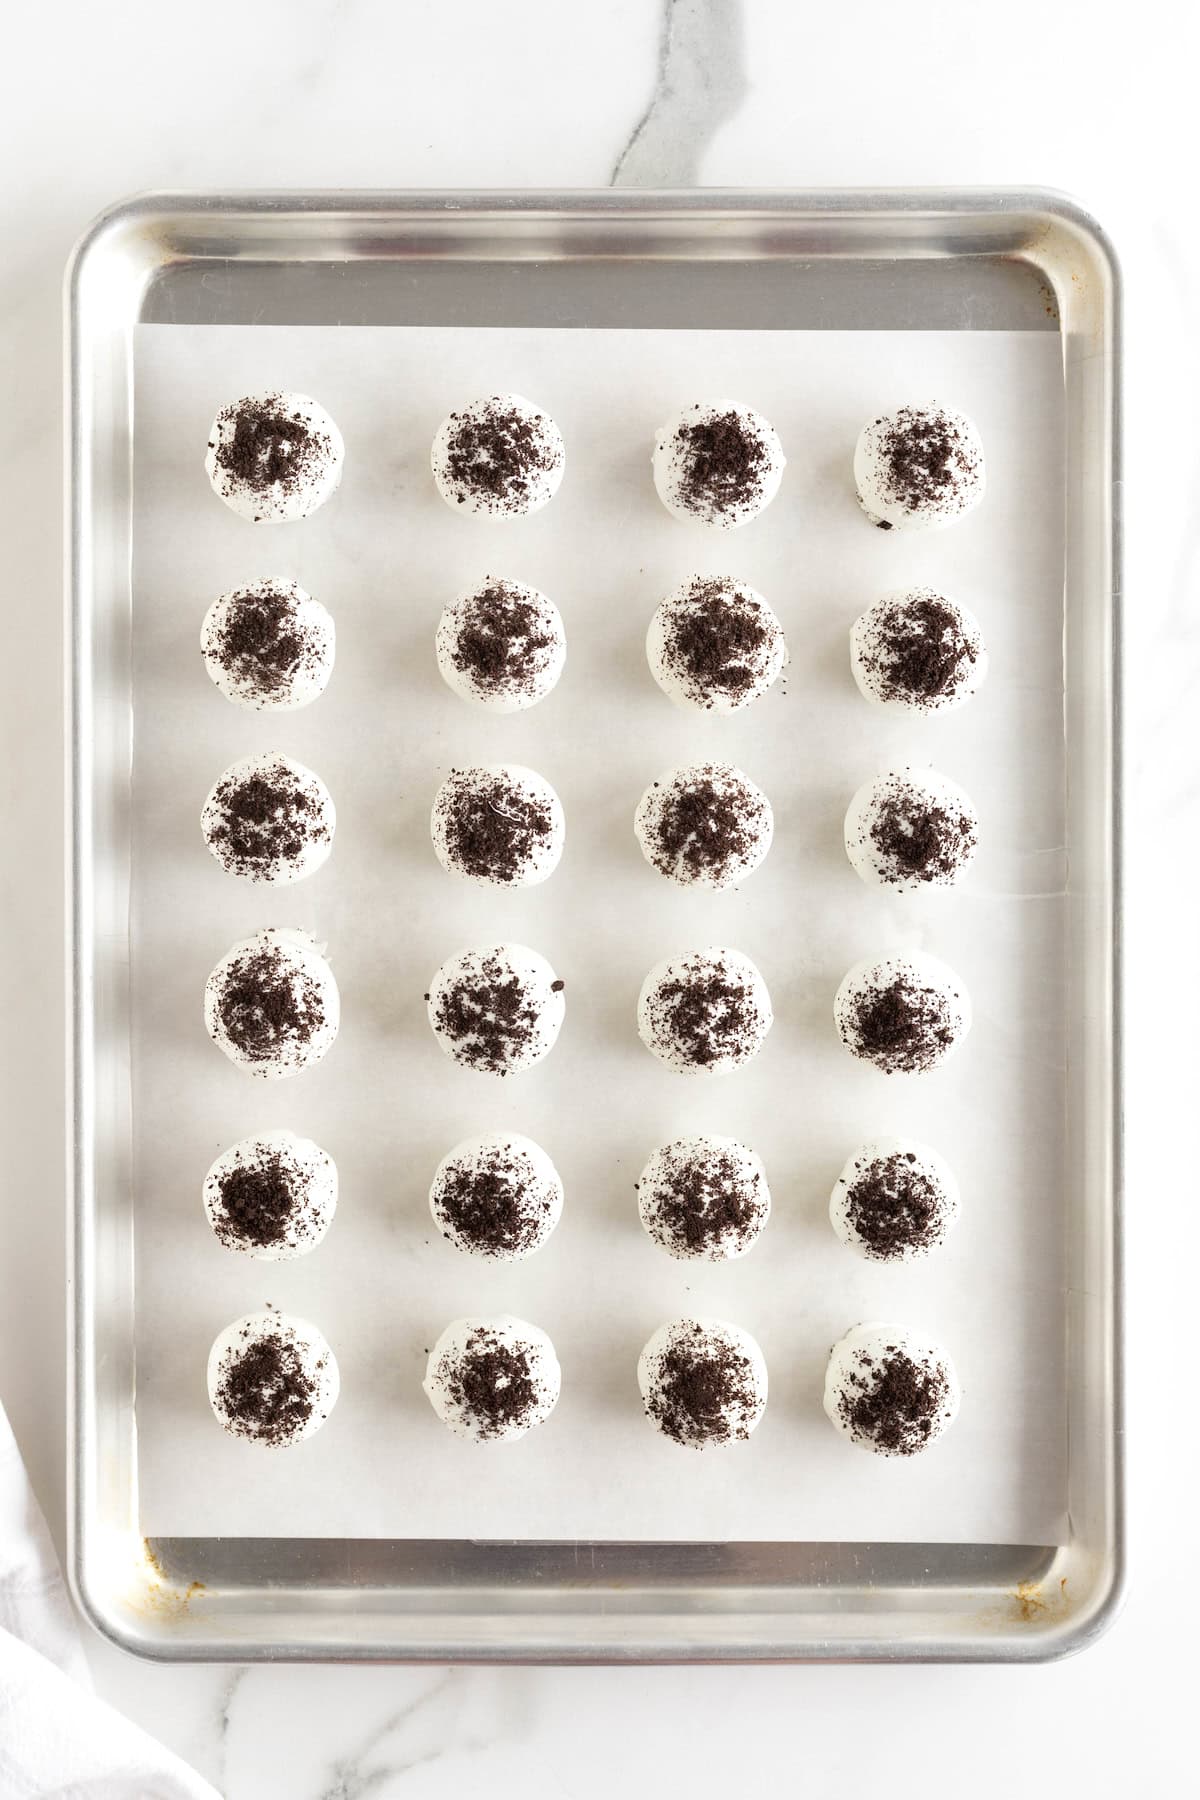 Oreo cake balls on an aluminum baking sheet lined with parchment paper.